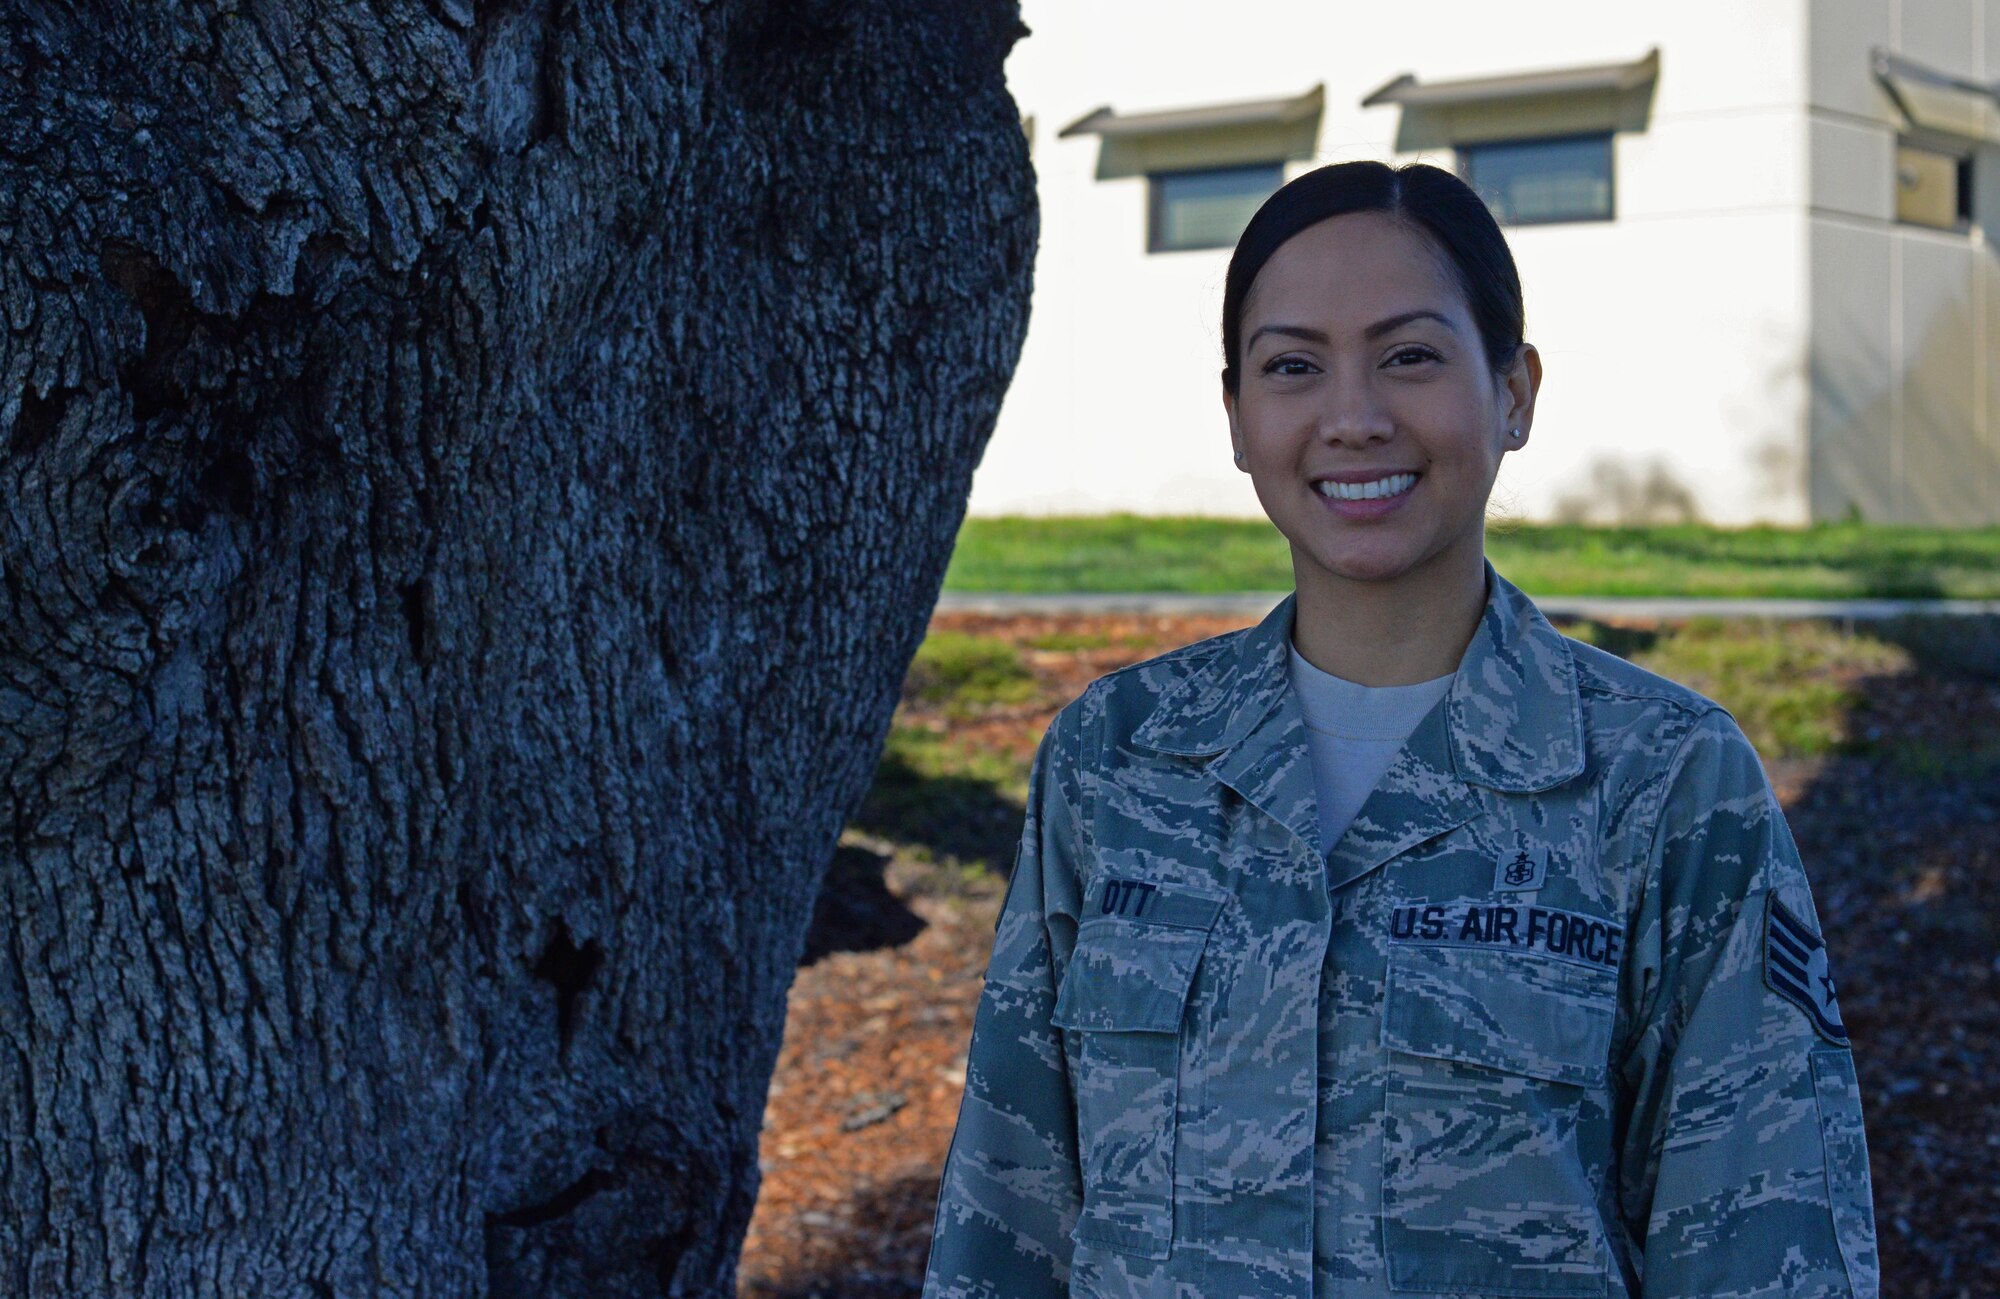 Staff Sgt. Christina Ott, 9th Medical Operations Squadron noncommissioned officer in charge of family health, poses for a photo, March 2, 2017. (U.S. Air Force photo/Airman 1st Class Tommy Wilbourn)